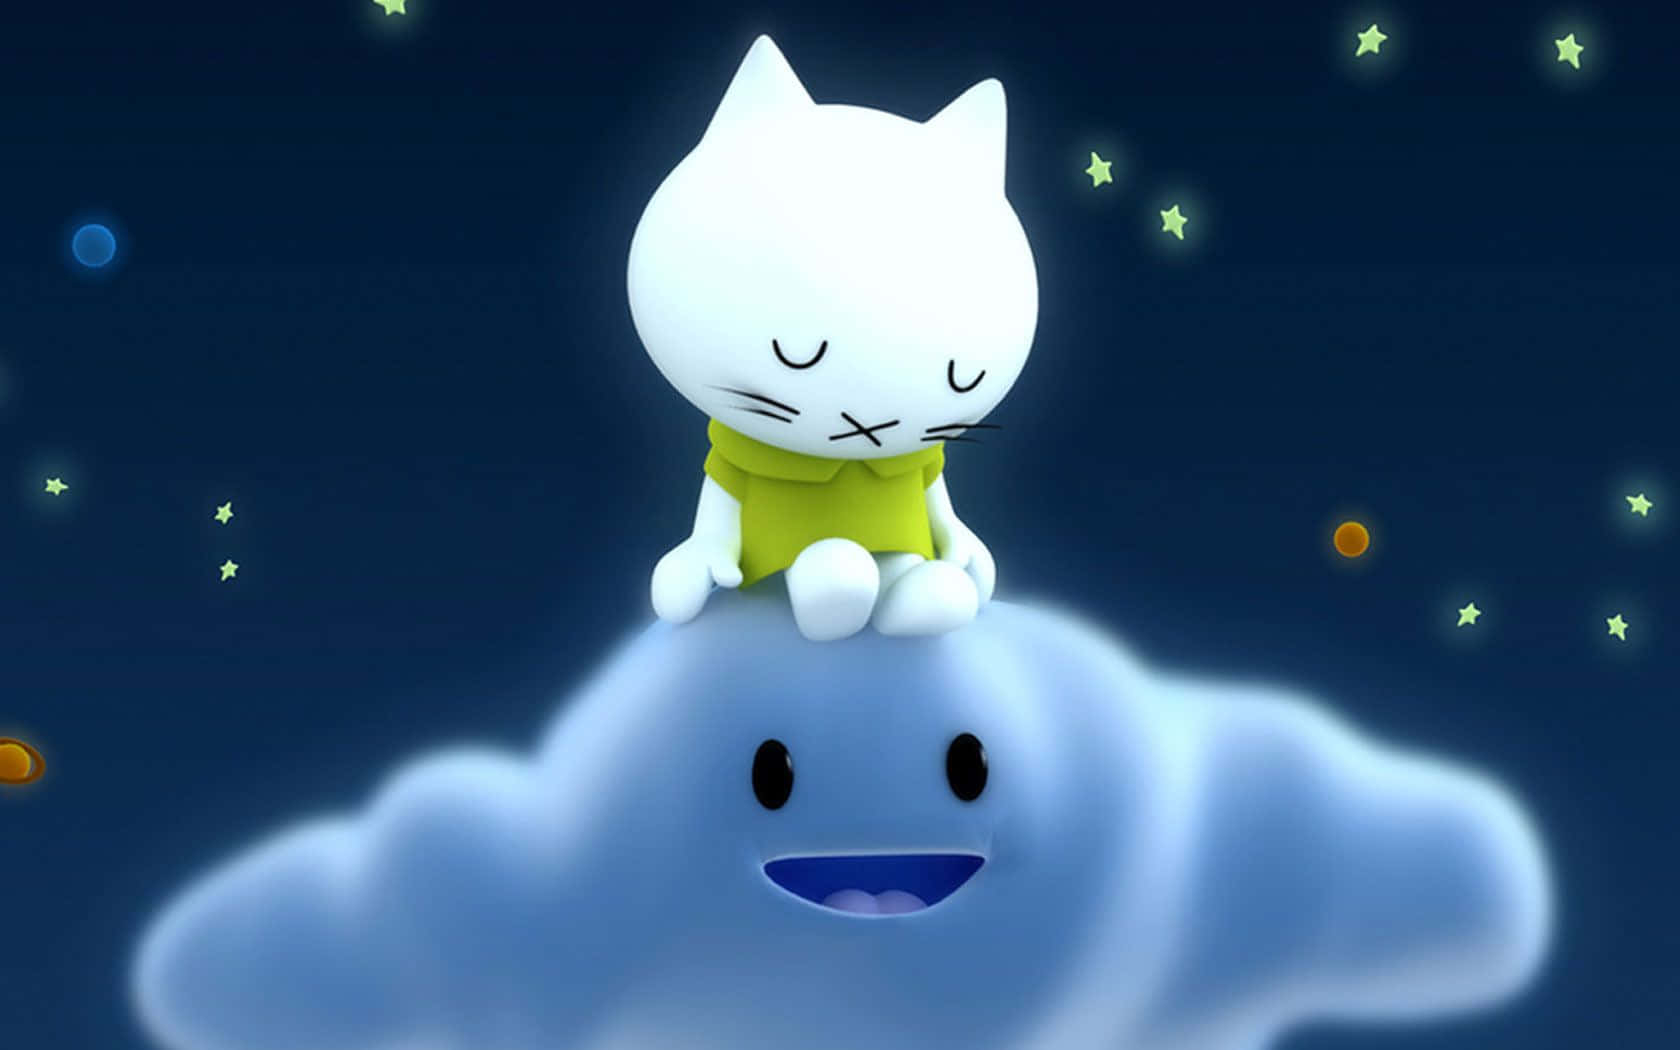 cute animated wallpapers